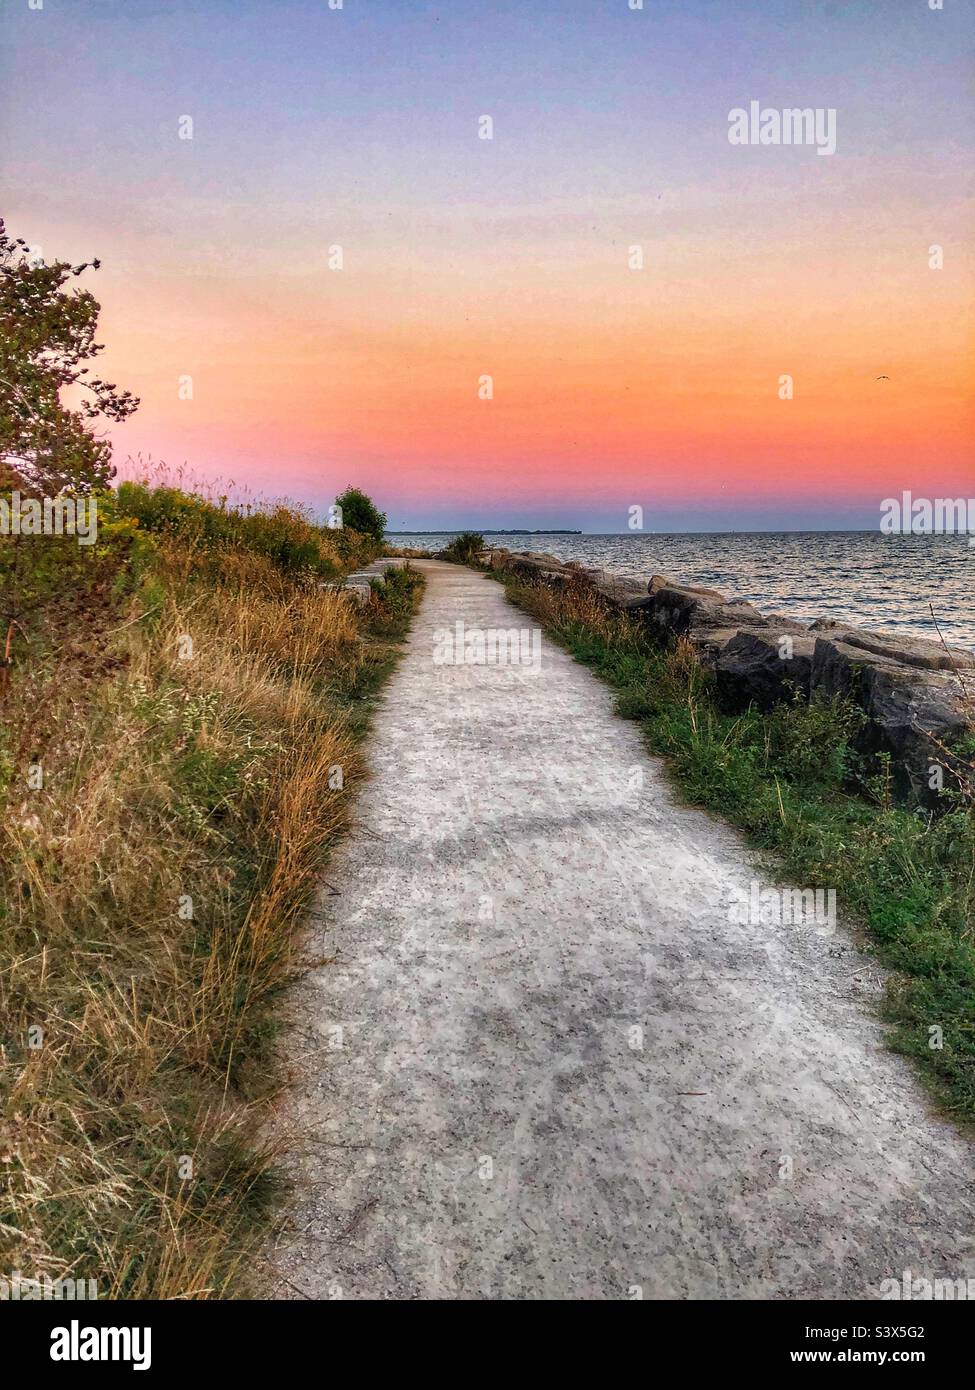 A gravel path leads to a beautiful sunset. Stock Photo